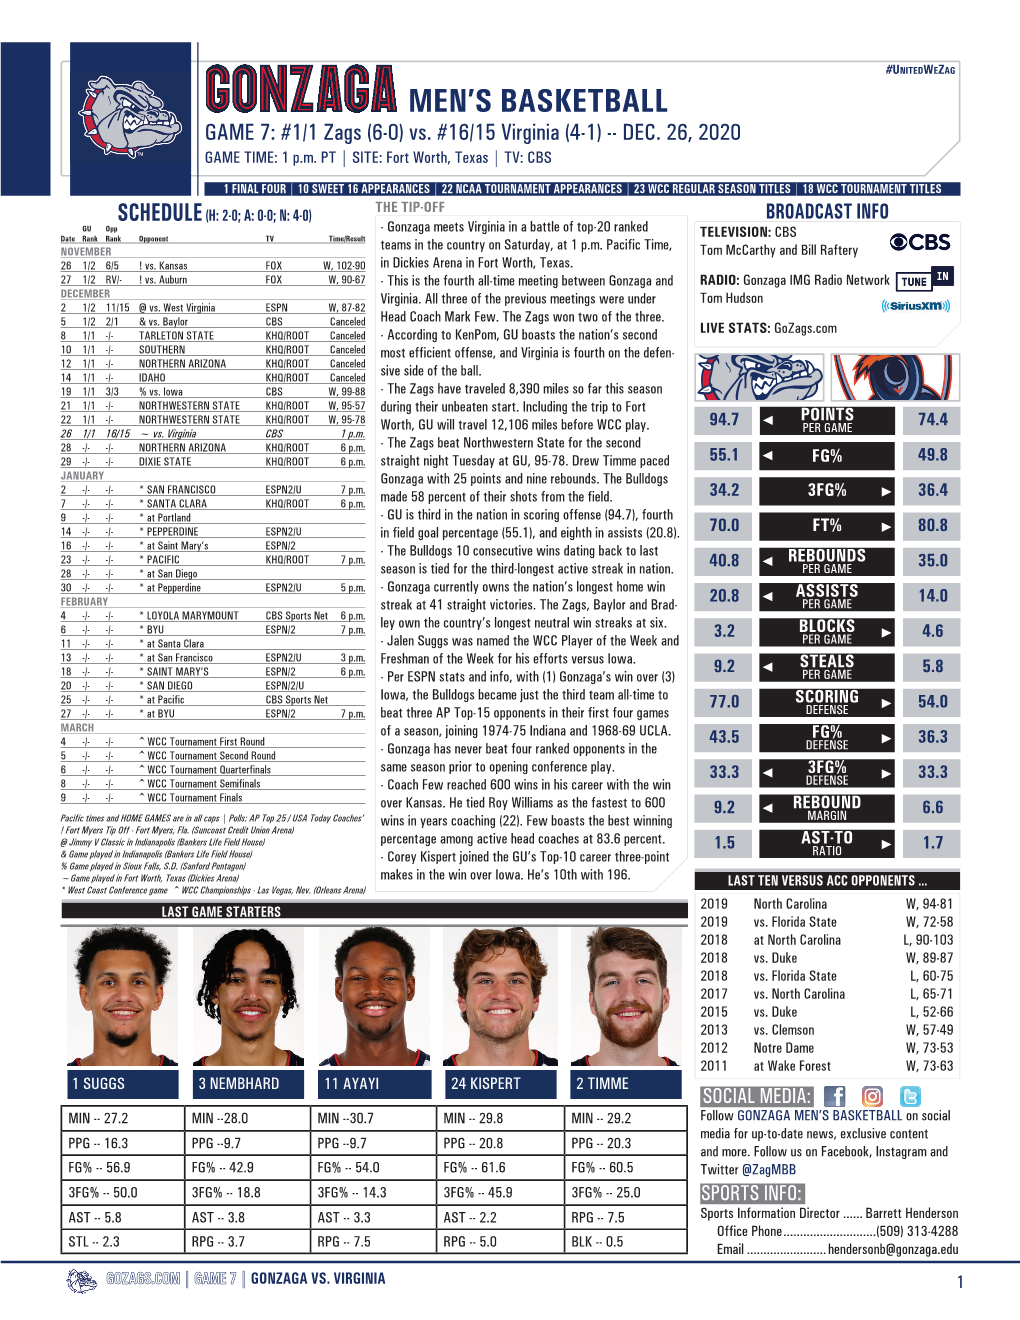 Men's Basketball Page 1/4 Team High/Low Analysis As of Dec 23, 2020 All Games